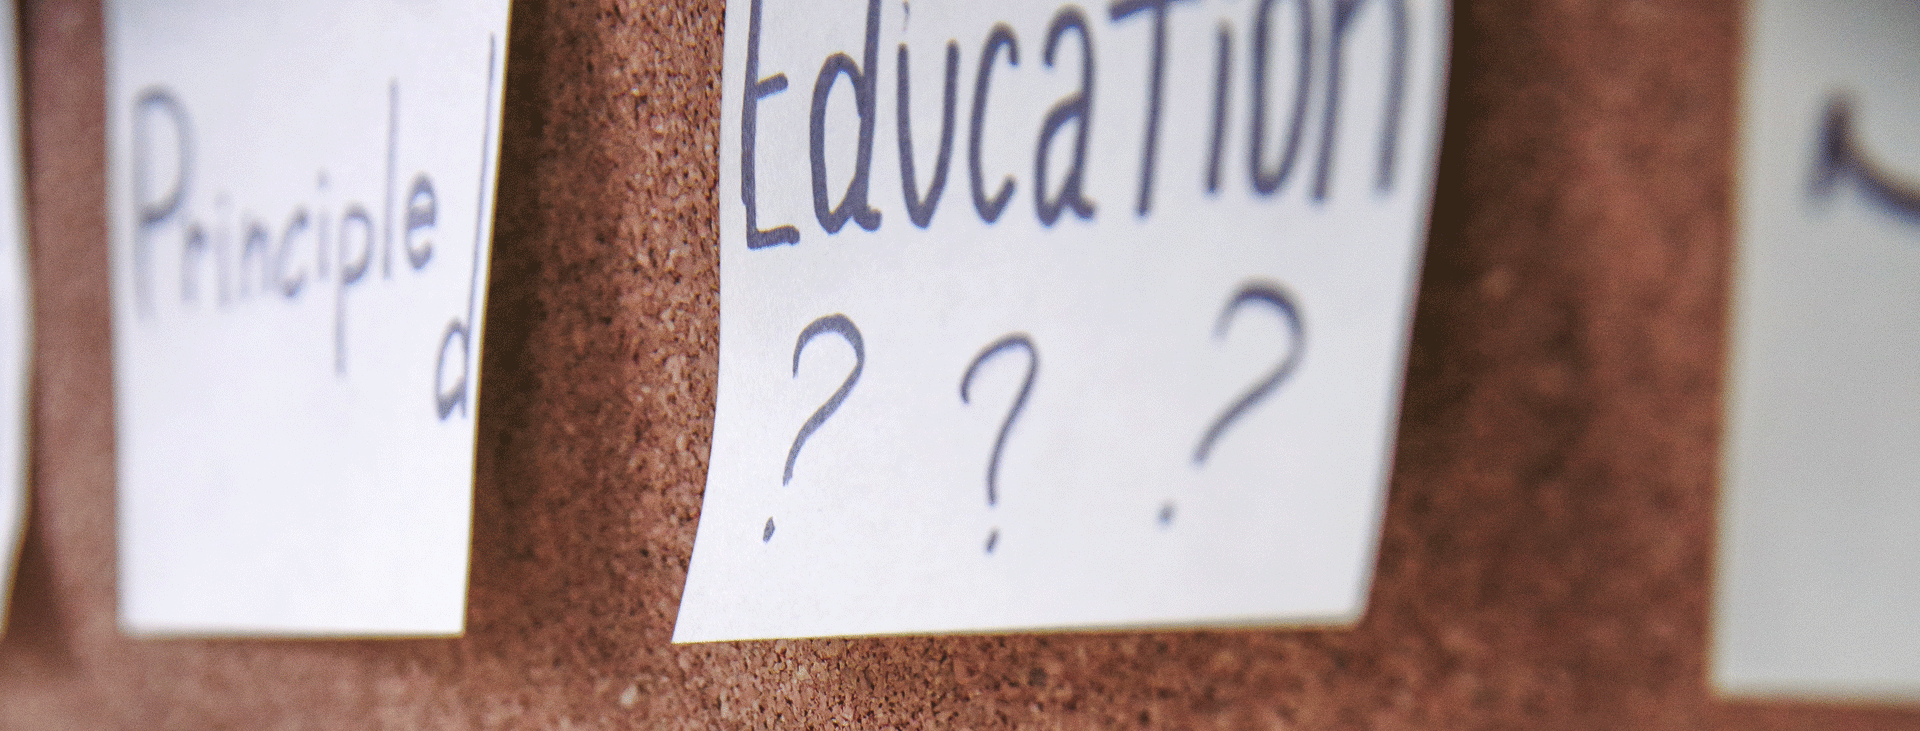 Paper with Education ??? written on it andpinned to a corkboard